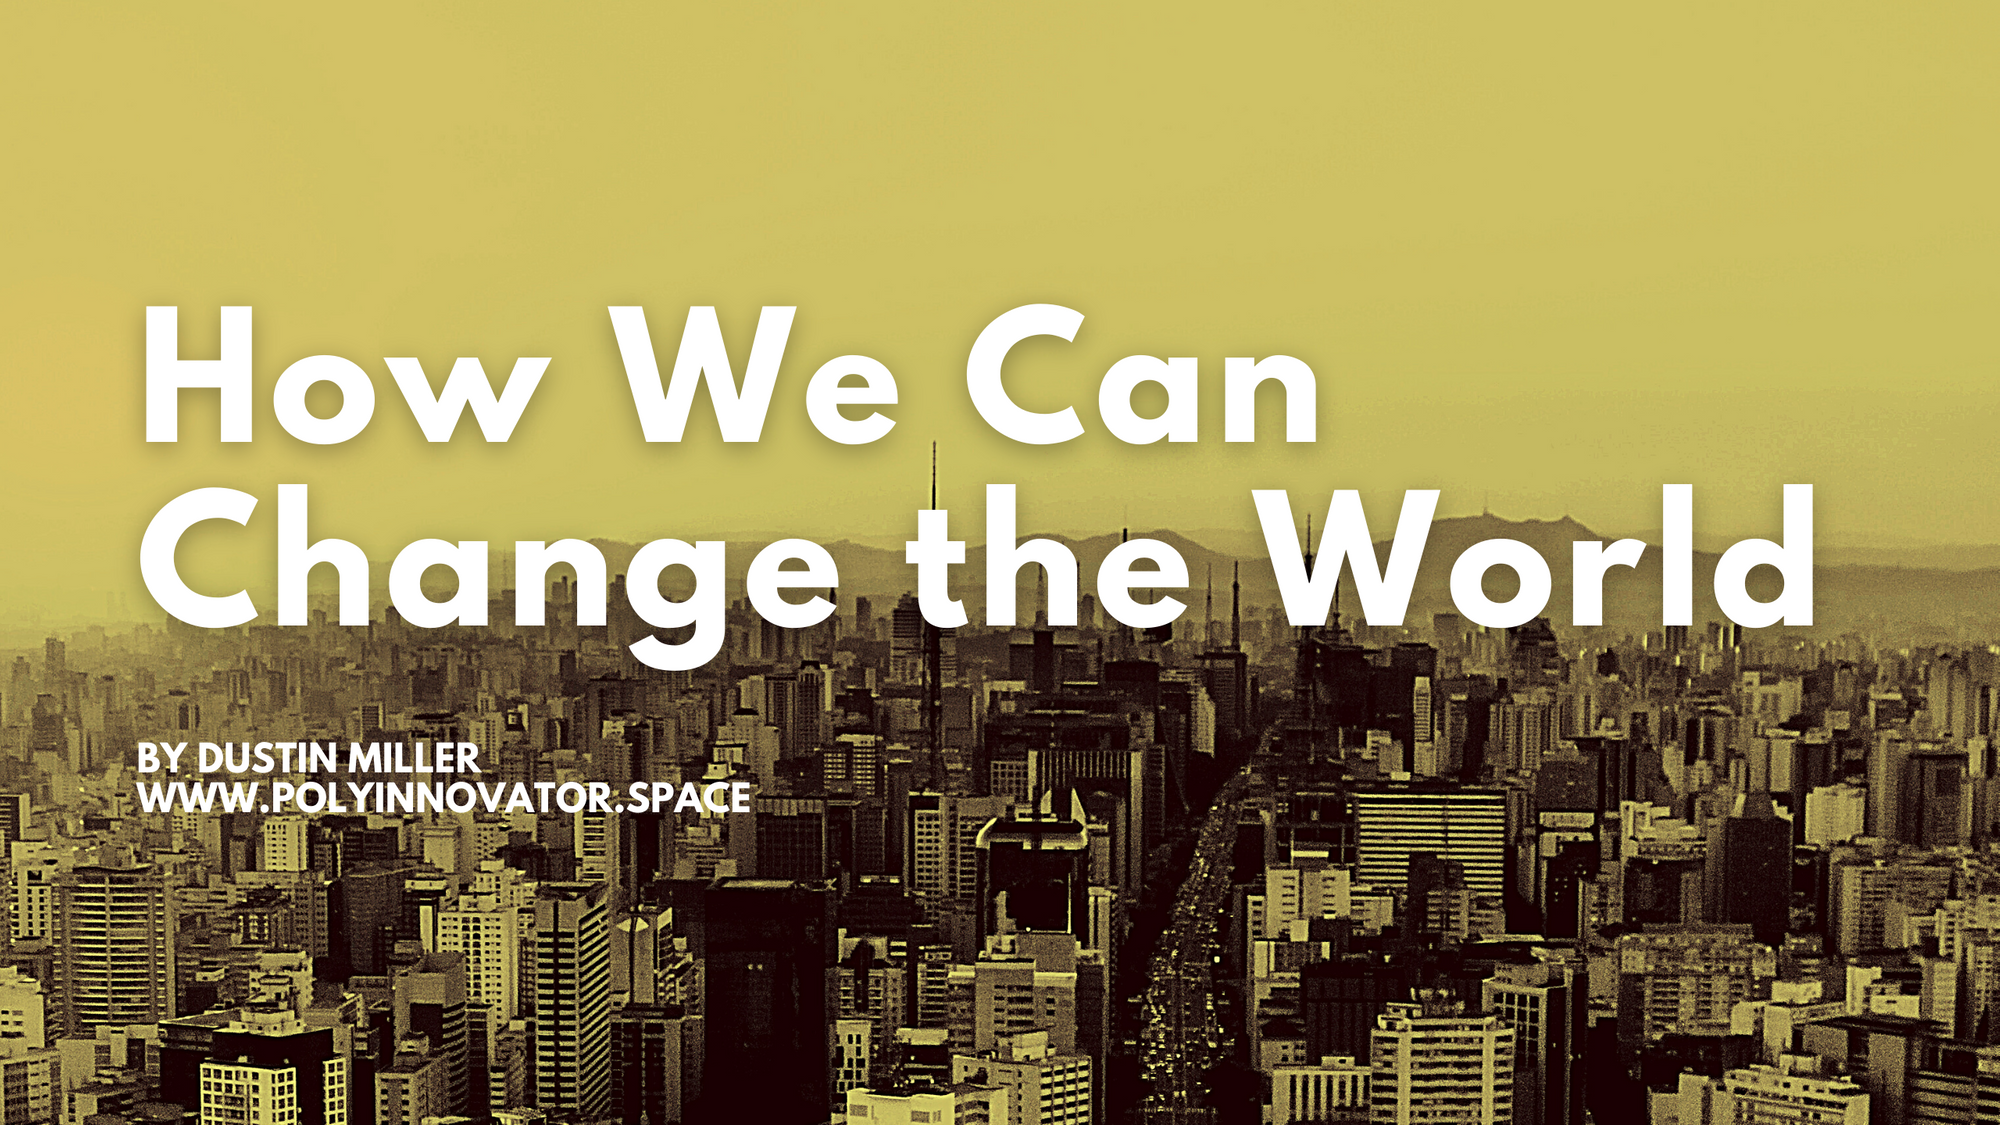 How We Can Change the World